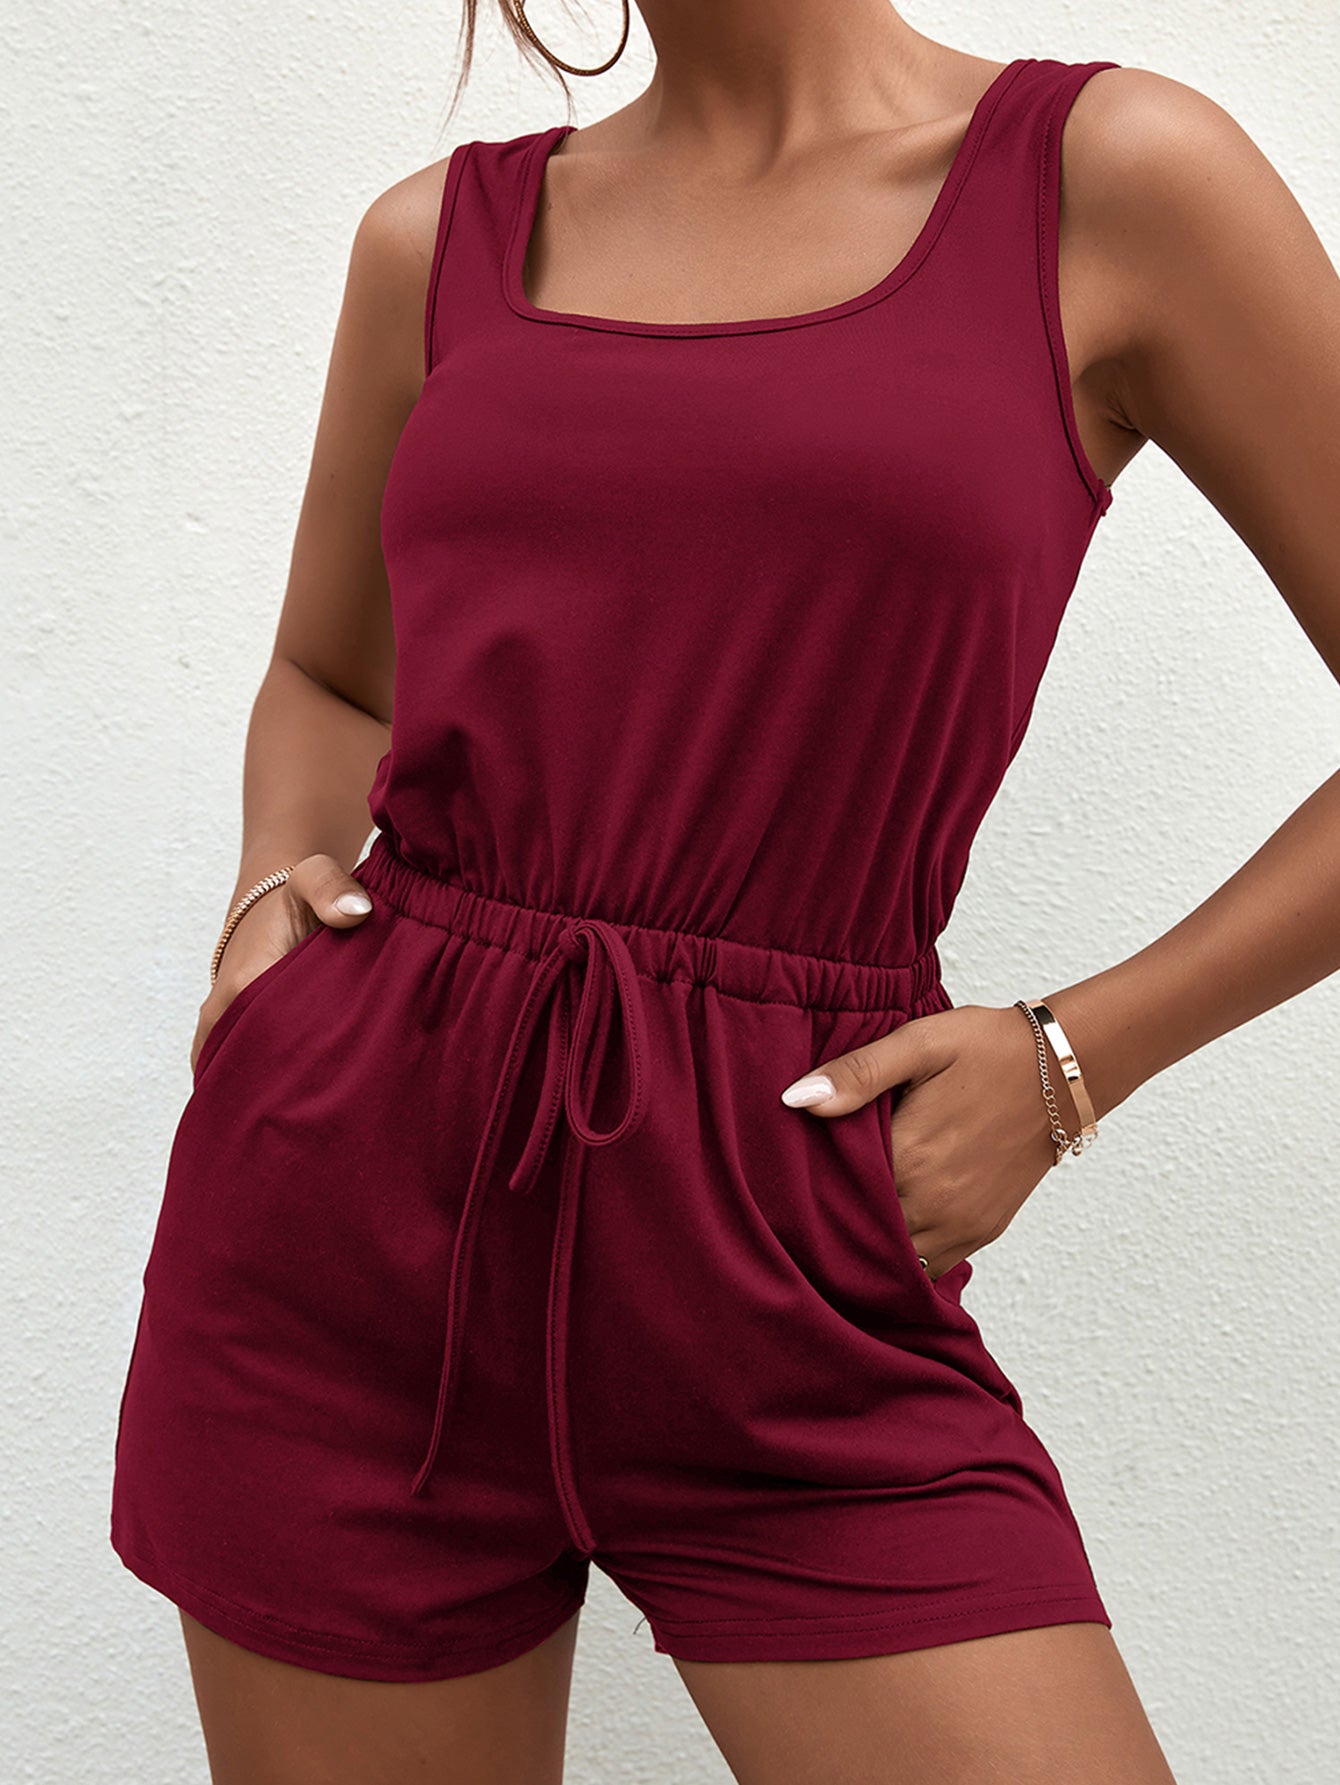 Square Neck Sleeveless Romper with Pockets - Guy Christopher 